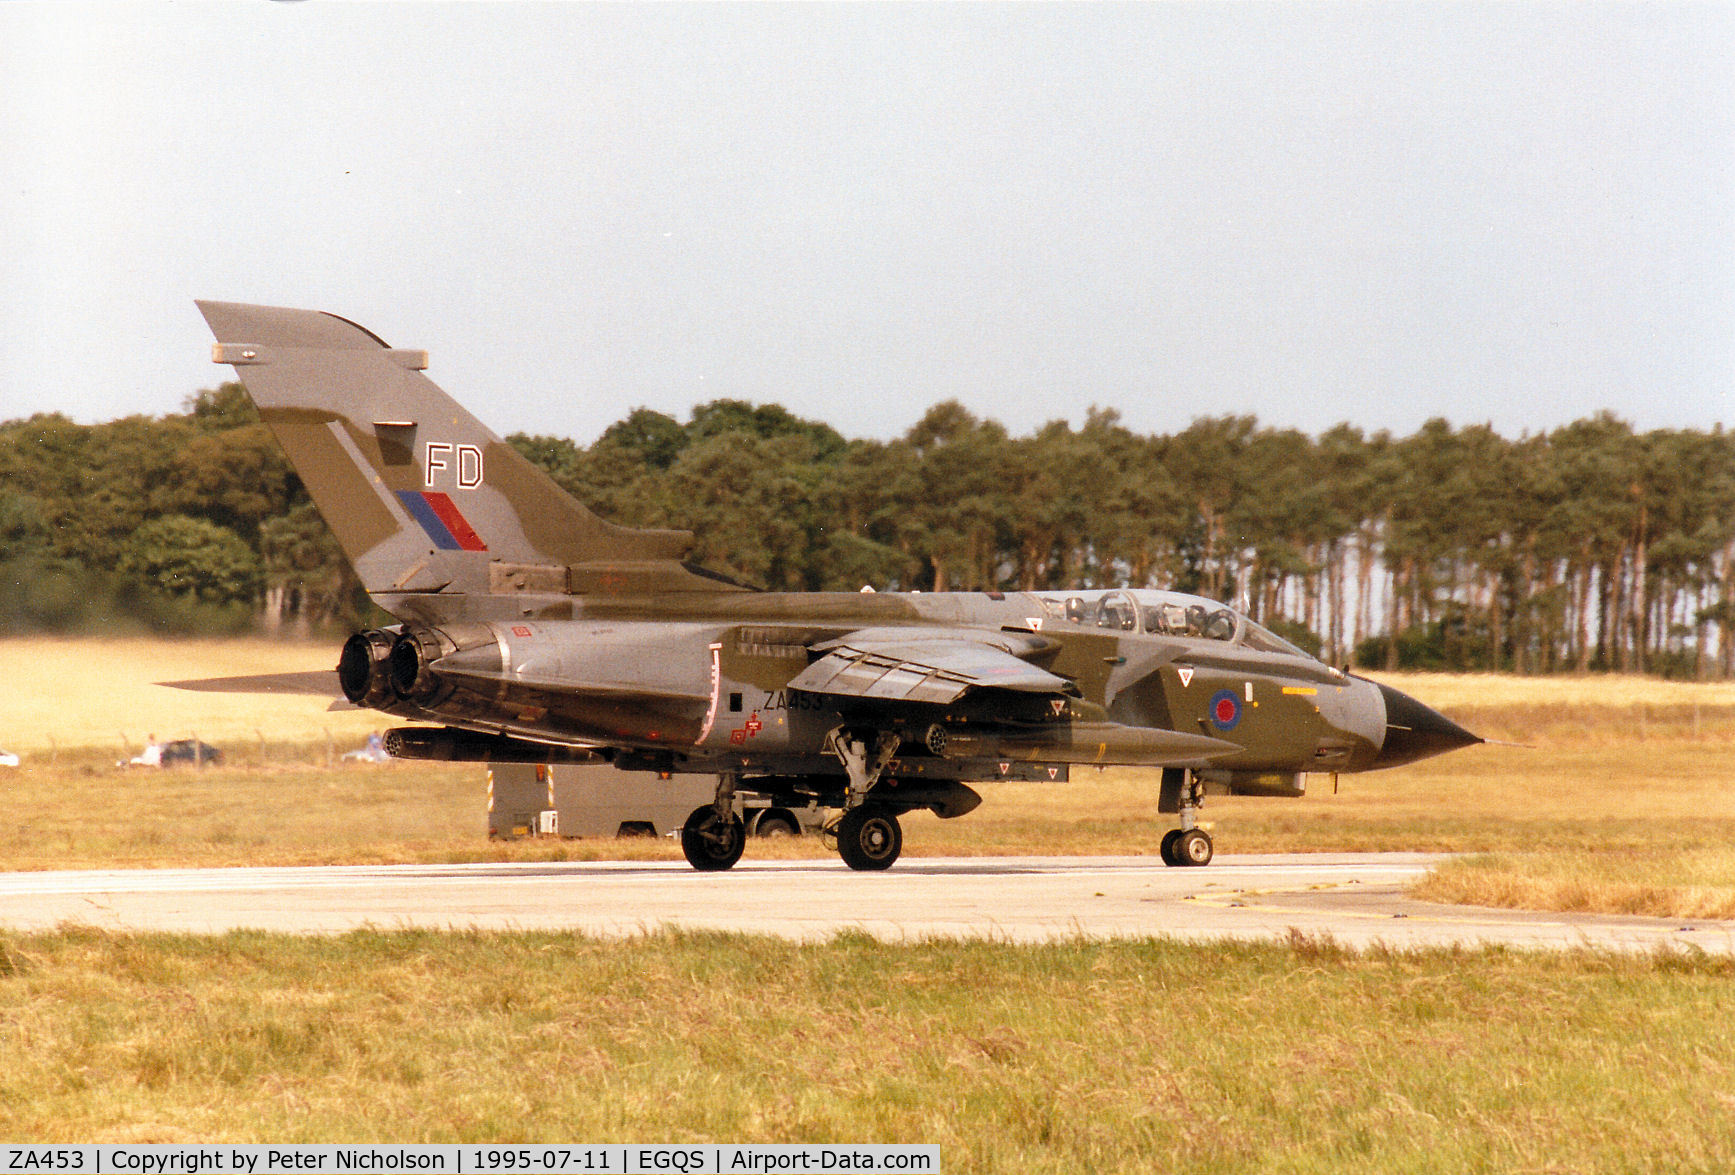 ZA453, 1983 Panavia Tornado GR.1B C/N BS083/249/3119, Tornado GR.1B of 12 Squadron lined up for take-off on Runway 05 at RAF Lossiemouth in the Summer of 1995.